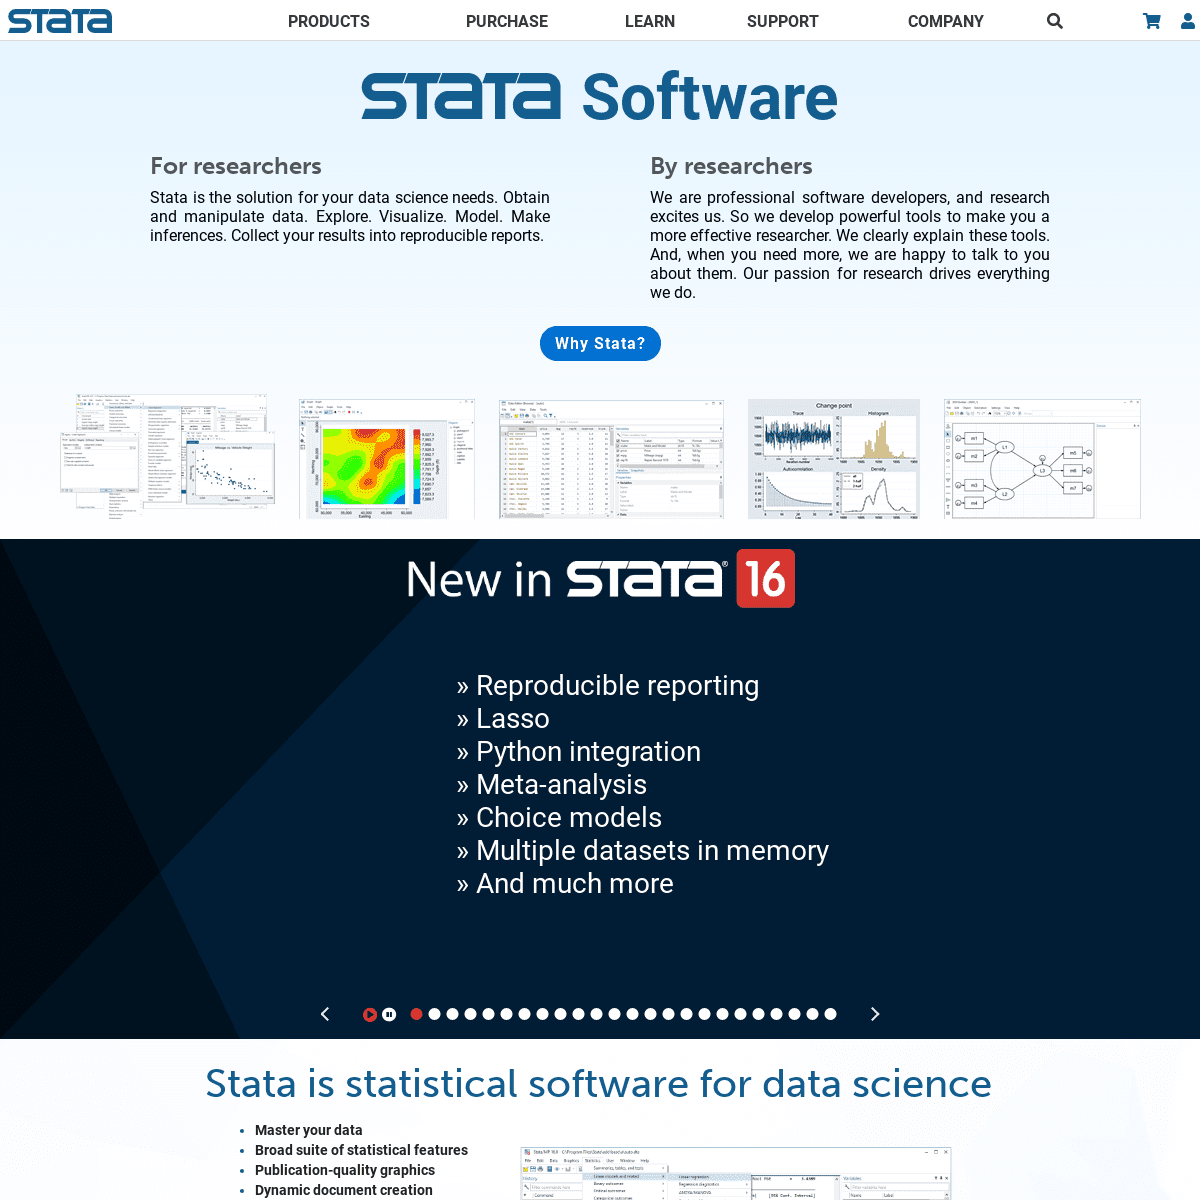 A complete backup of stata.com